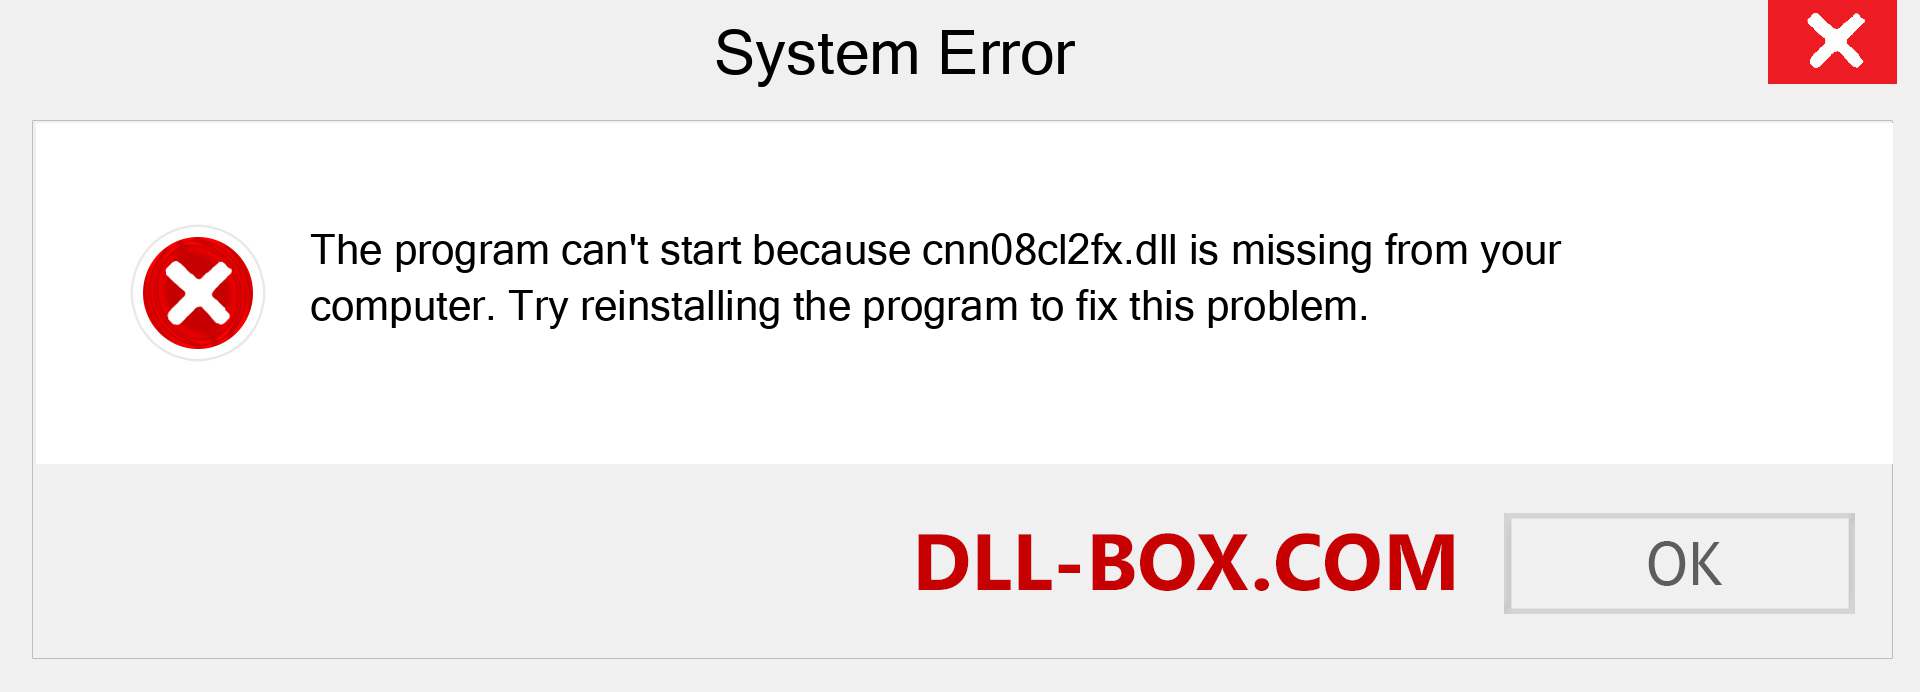  cnn08cl2fx.dll file is missing?. Download for Windows 7, 8, 10 - Fix  cnn08cl2fx dll Missing Error on Windows, photos, images